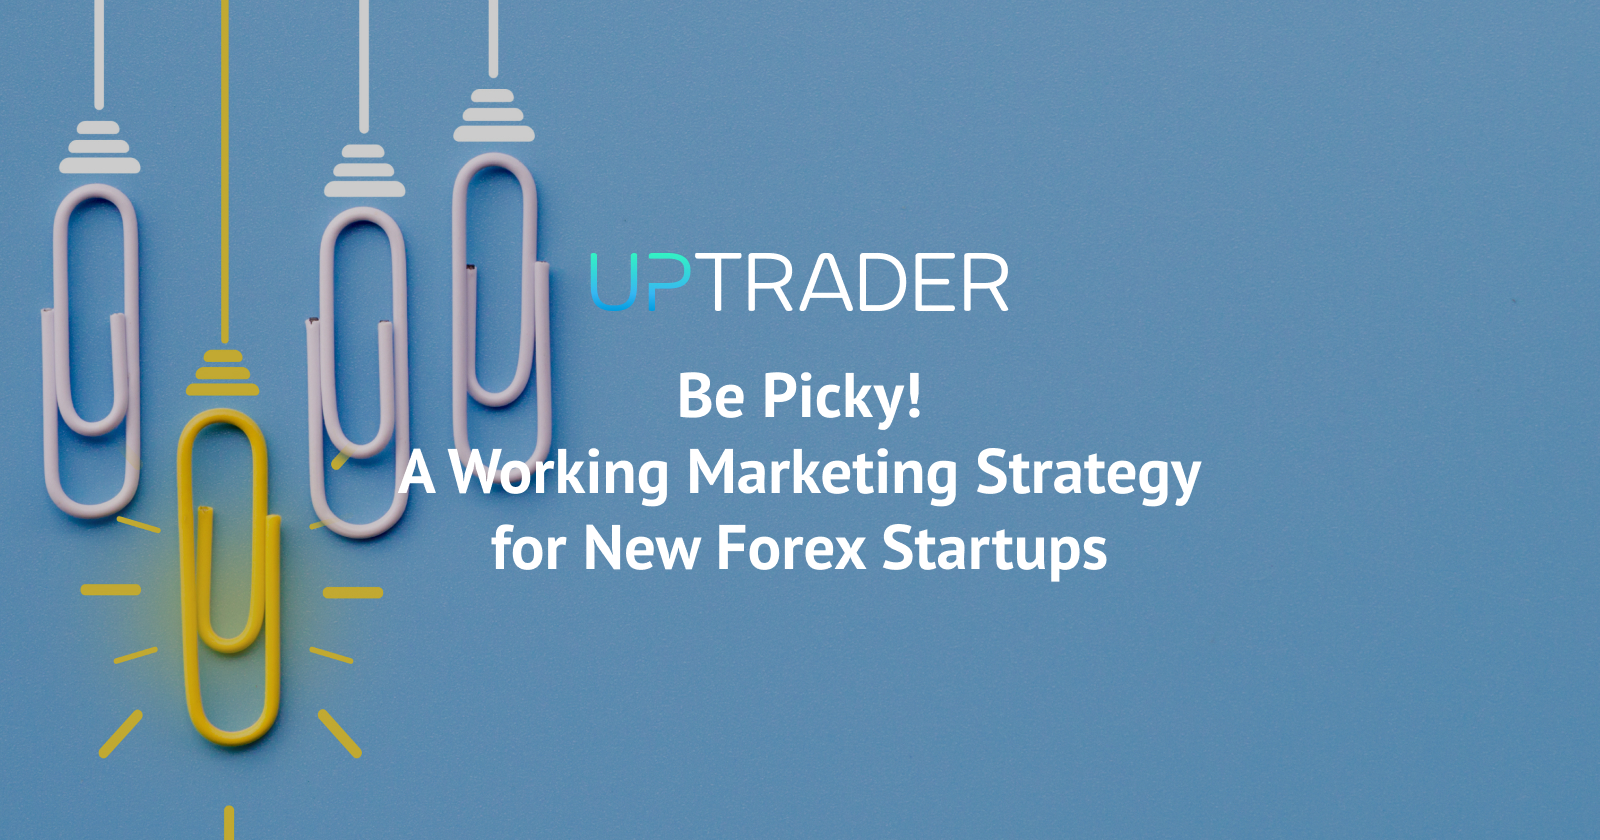 Working Marketing Strategy for New Forex Startups